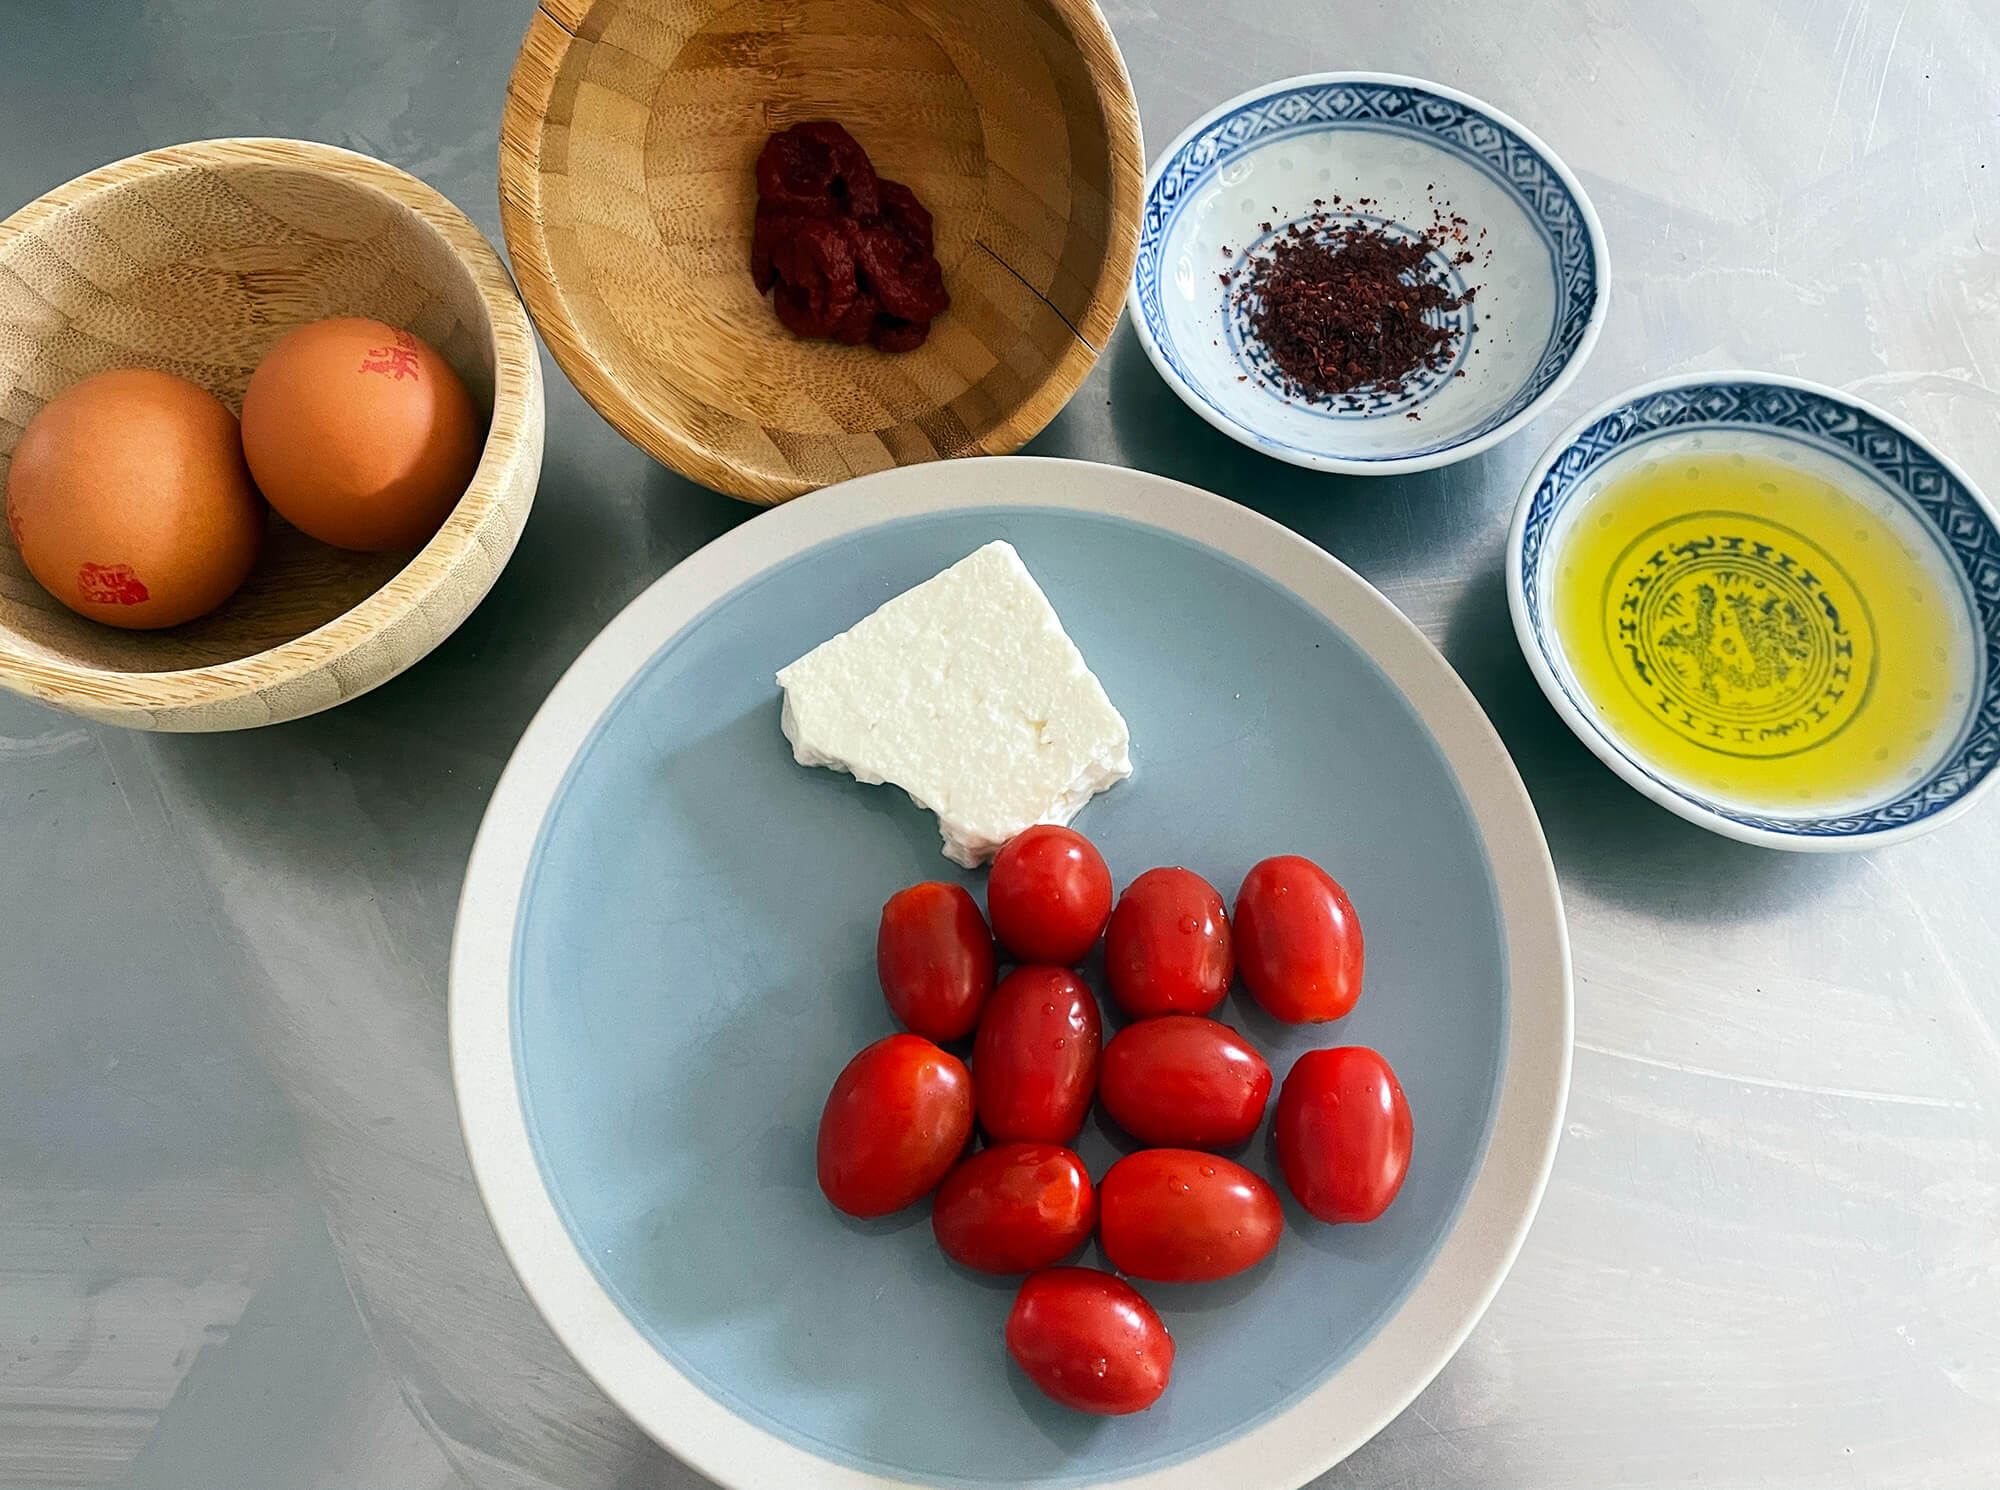 greek tomatoes, feta cheese, eggs, olive oil, tomato paste and chilli flakes, ingredients for the Greek dish of kagianas